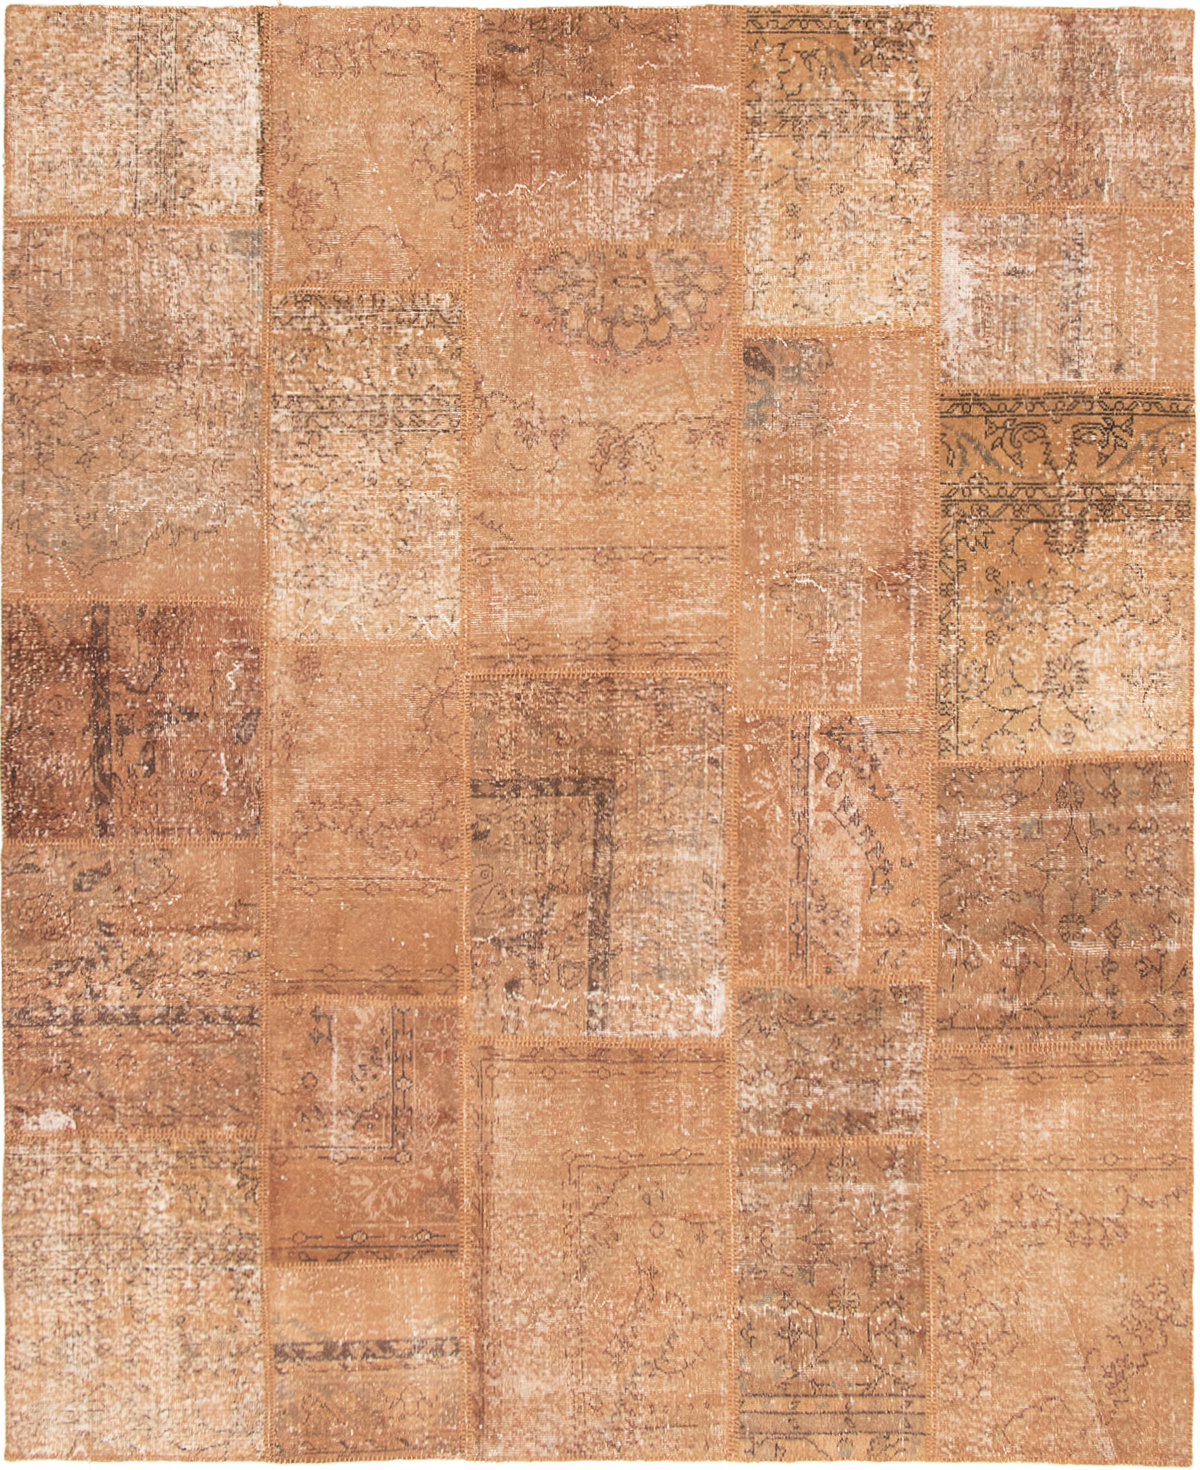 Hand-knotted Color Transition Patch Tan Wool Rug 8'2" x 10'0" Size: 8'2" x 10'0"  